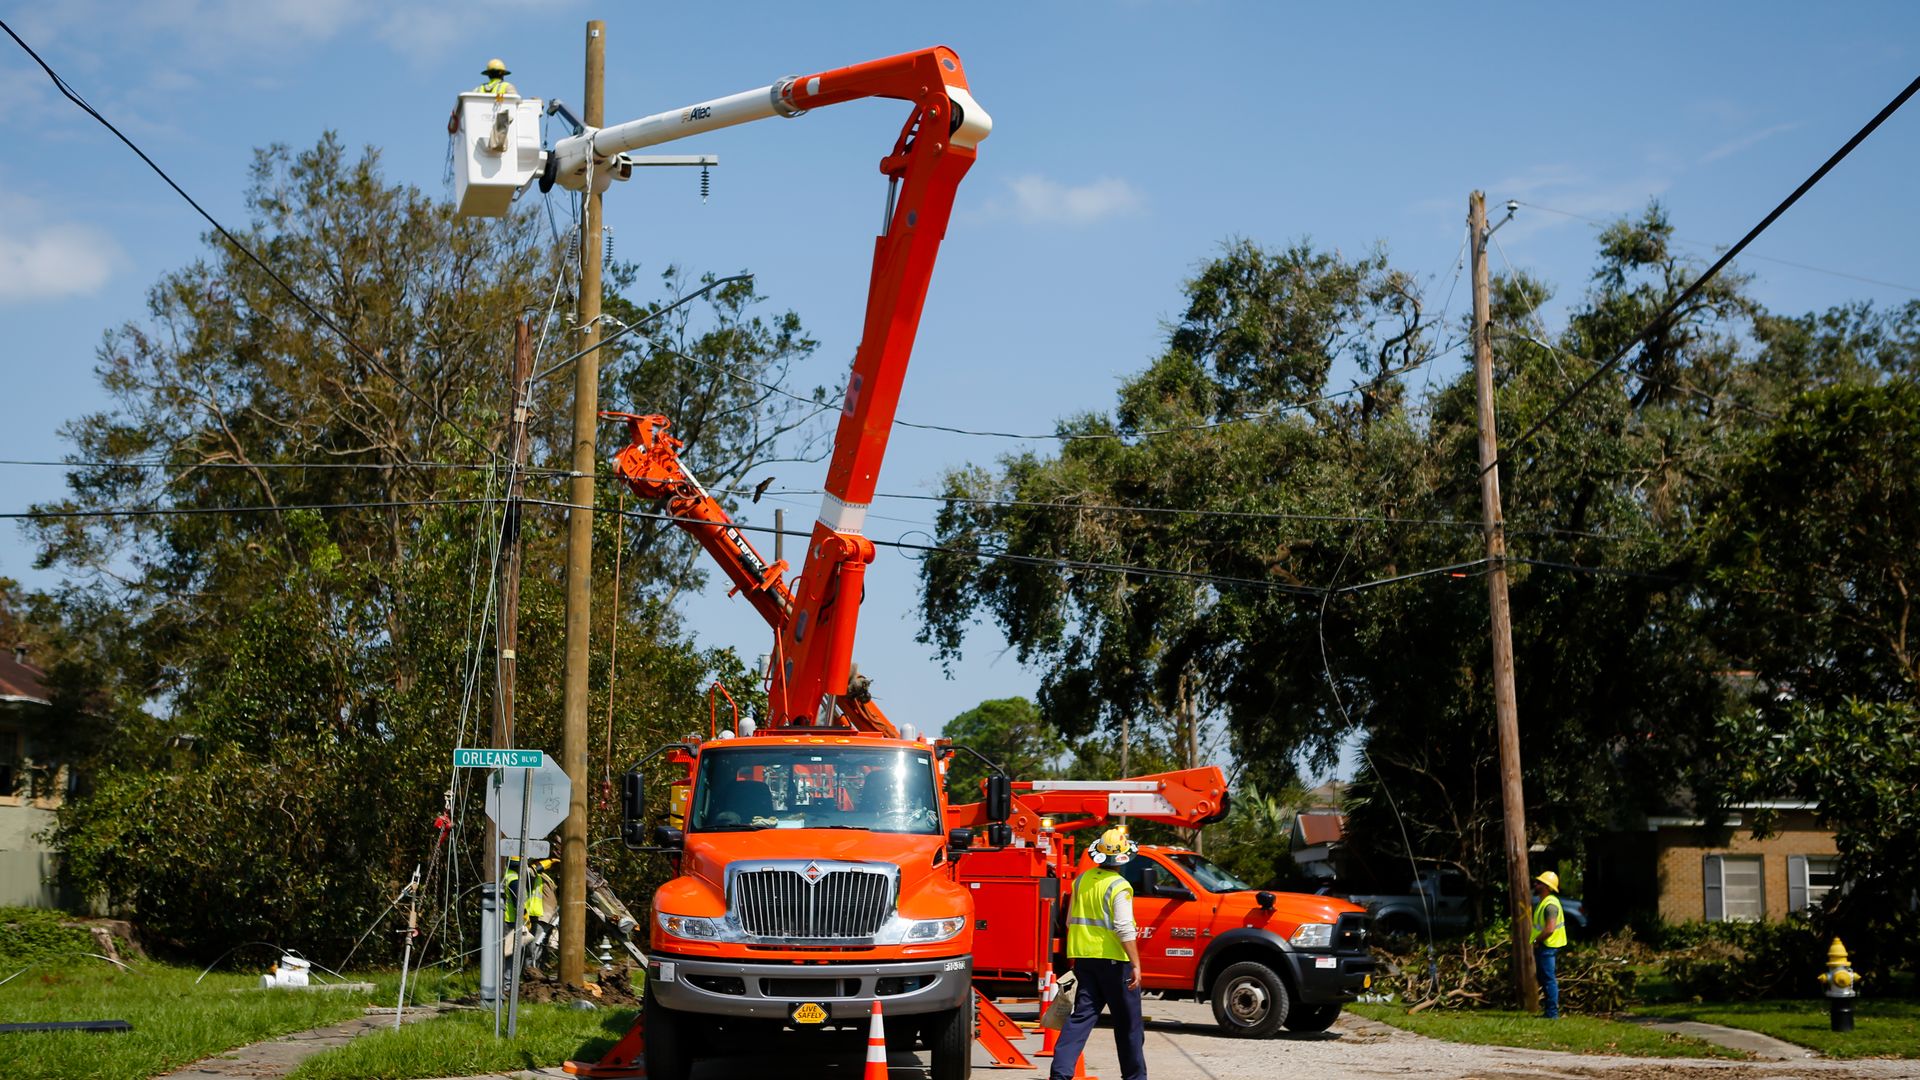 A worker tends to gear at the top of an electrical pole from inside a bucket truck, which is extended to reach the top of the pole. On the ground, several more workers view the progress.